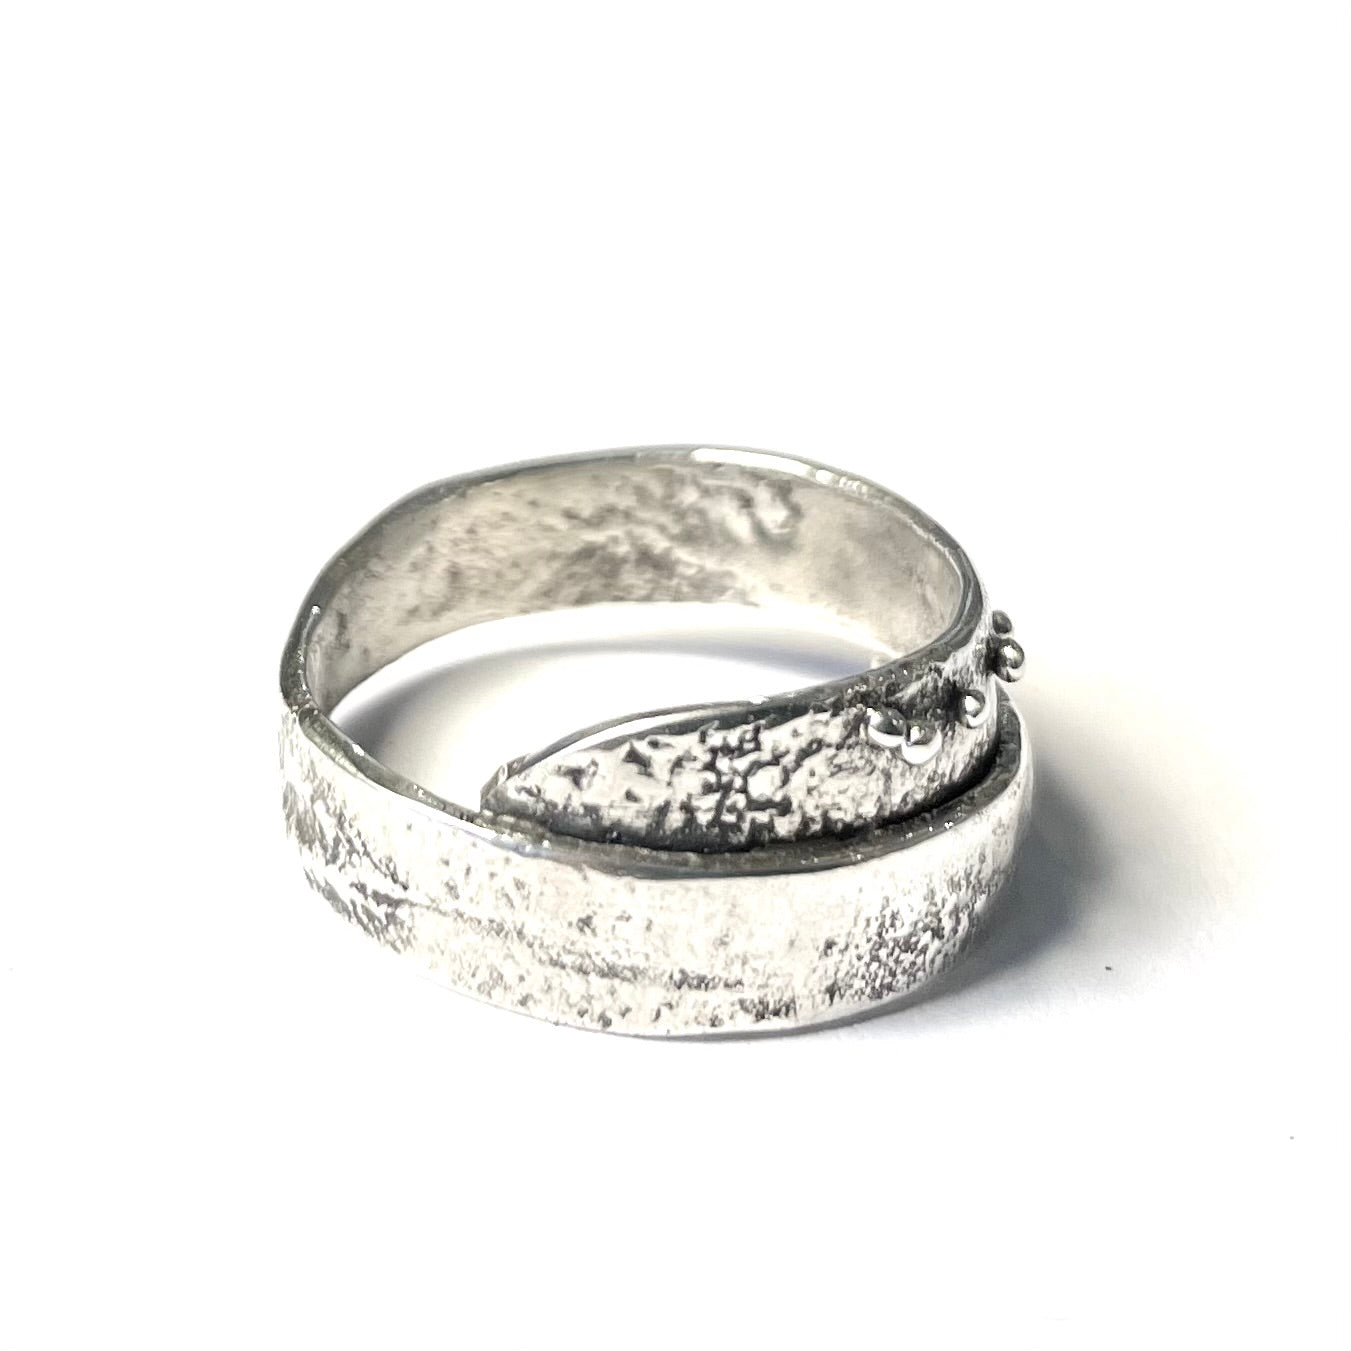 Organic reticulated ring